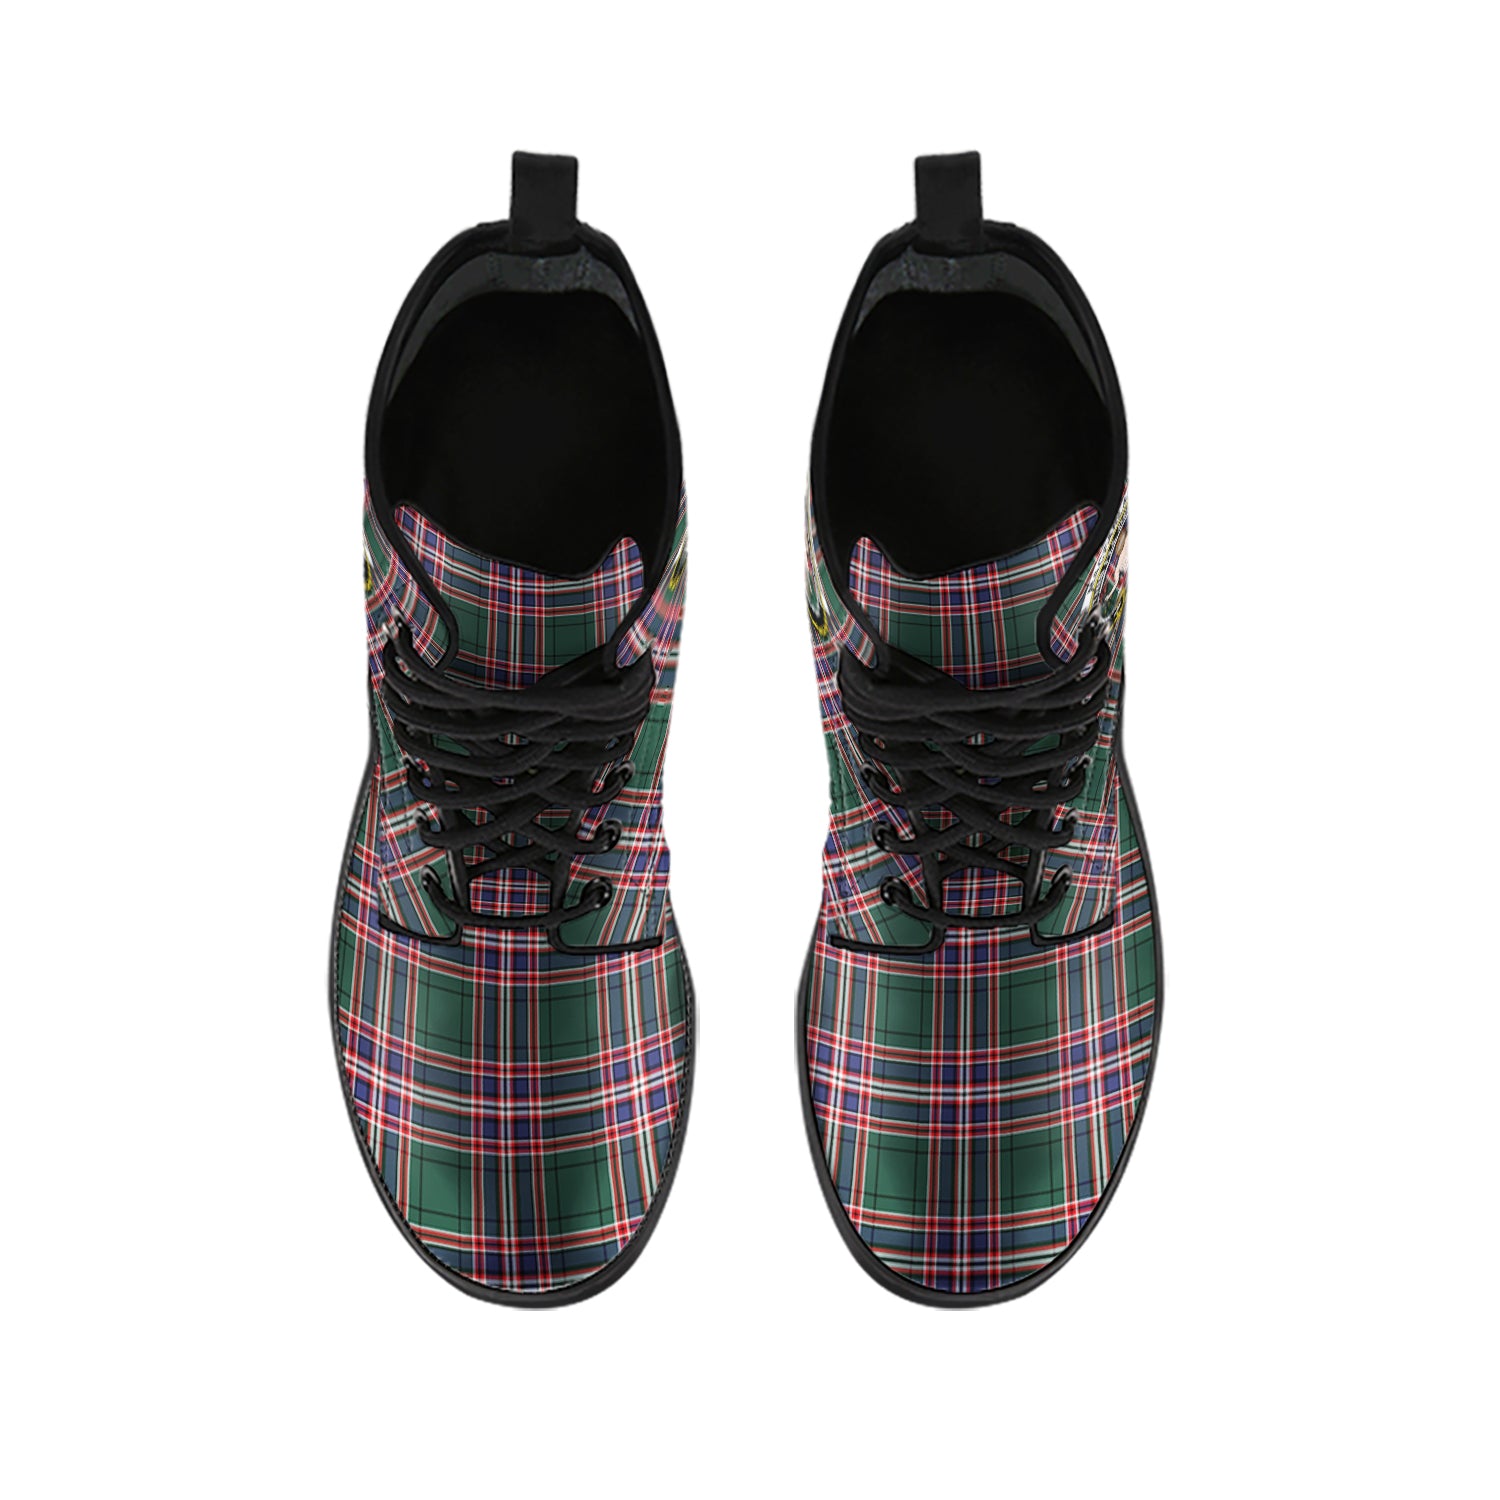 macfarlane-hunting-modern-tartan-leather-boots-with-family-crest